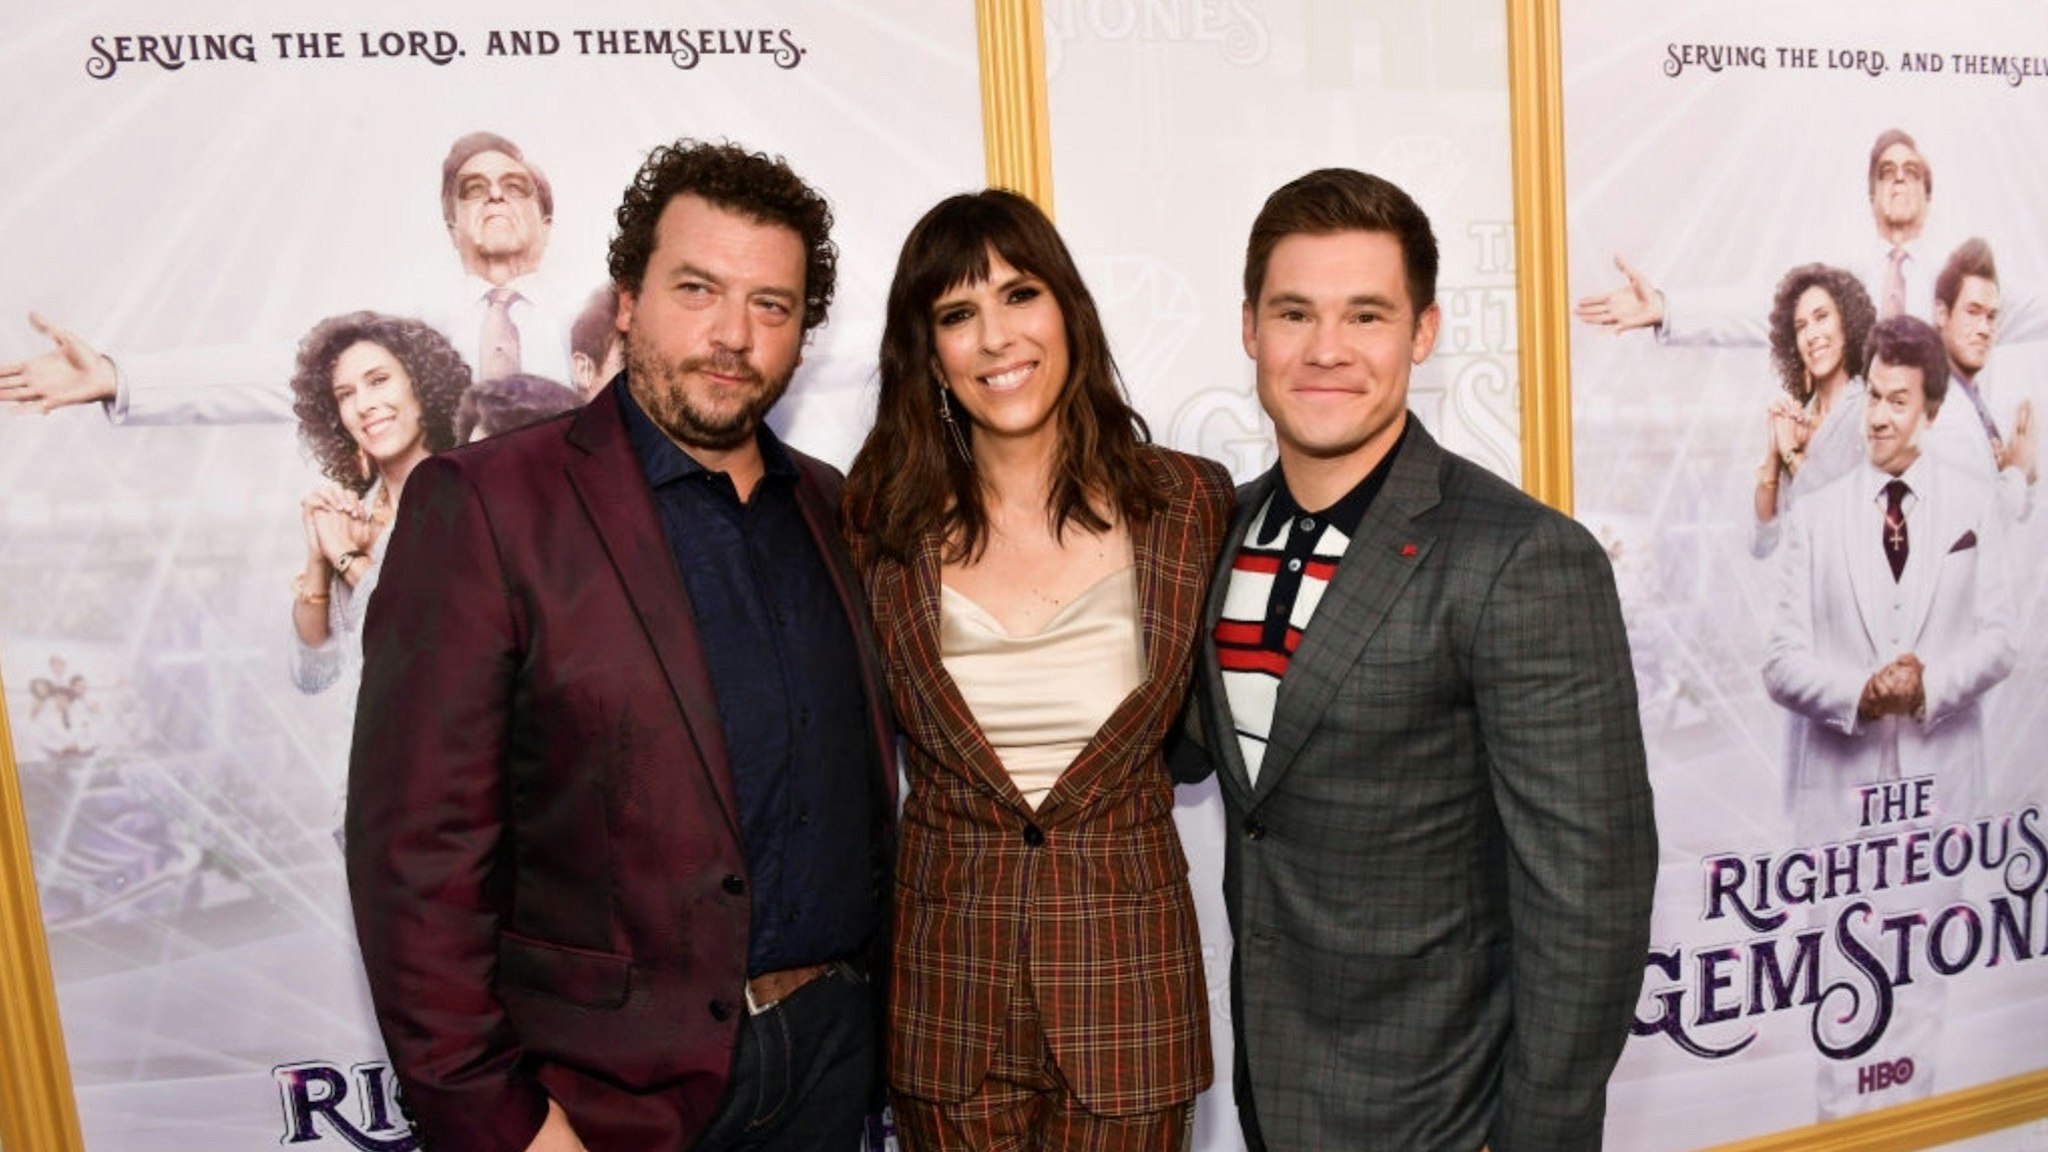 Danny McBride, Edi Patterson and Adam DeVine attend the Los Angeles premiere of New HBO Series "The Righteous Gemstones" at Paramount Studios on July 25, 2019 in Hollywood, California.